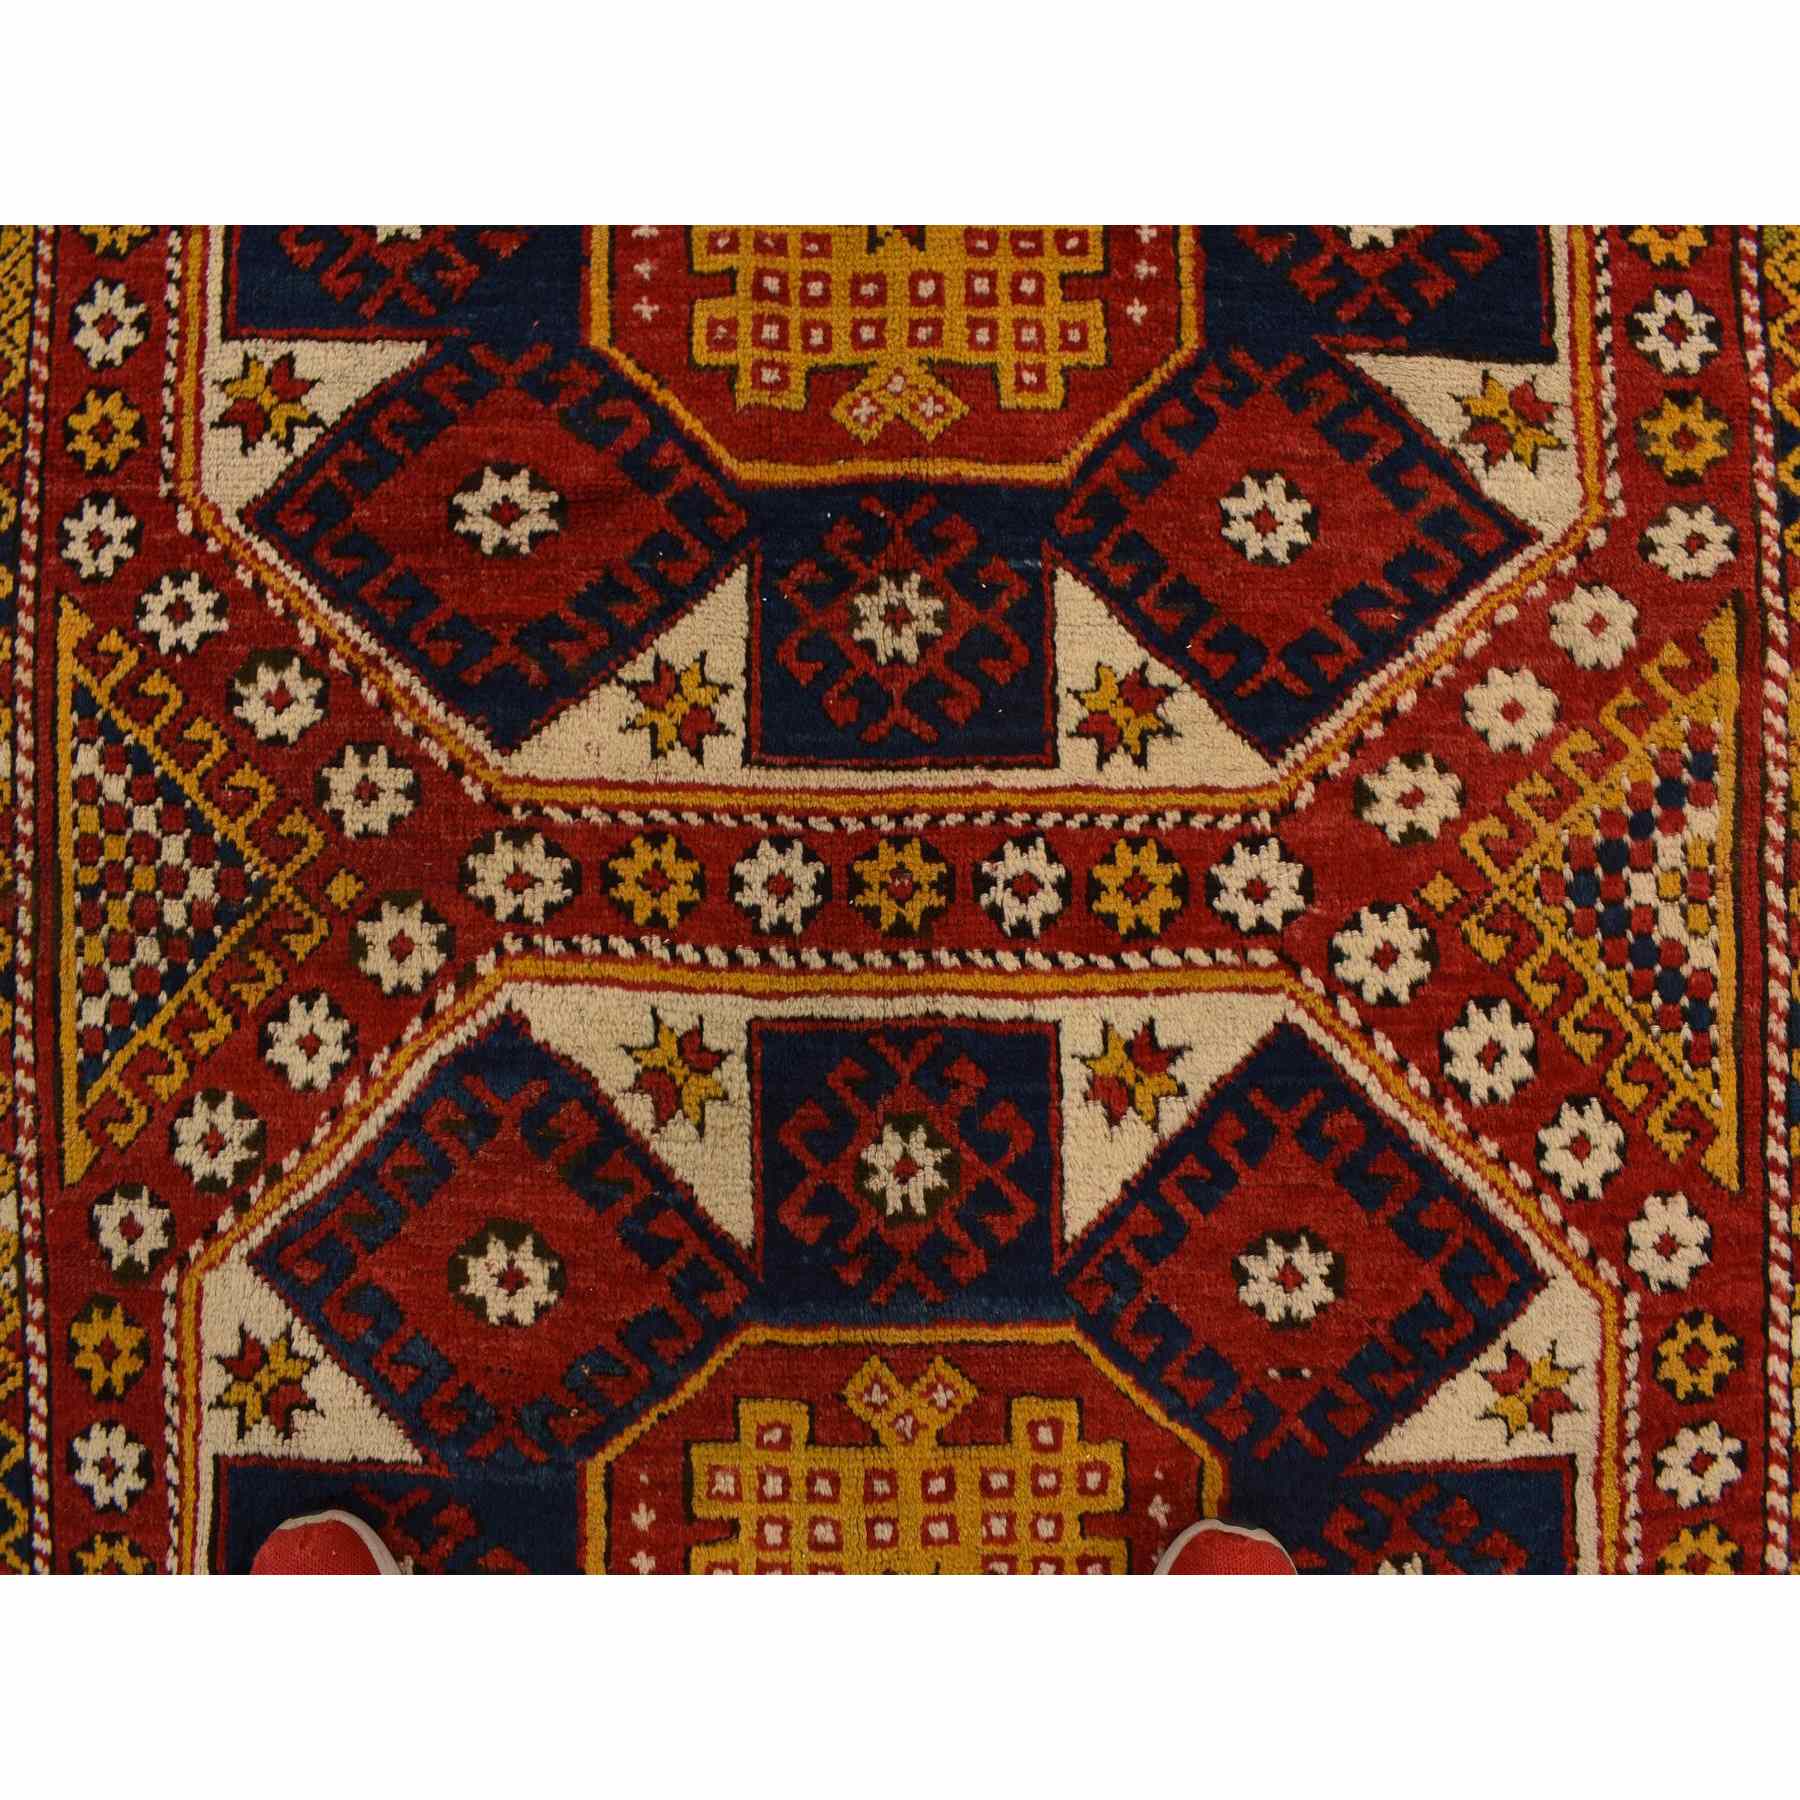 Antique-Hand-Knotted-Rug-391165